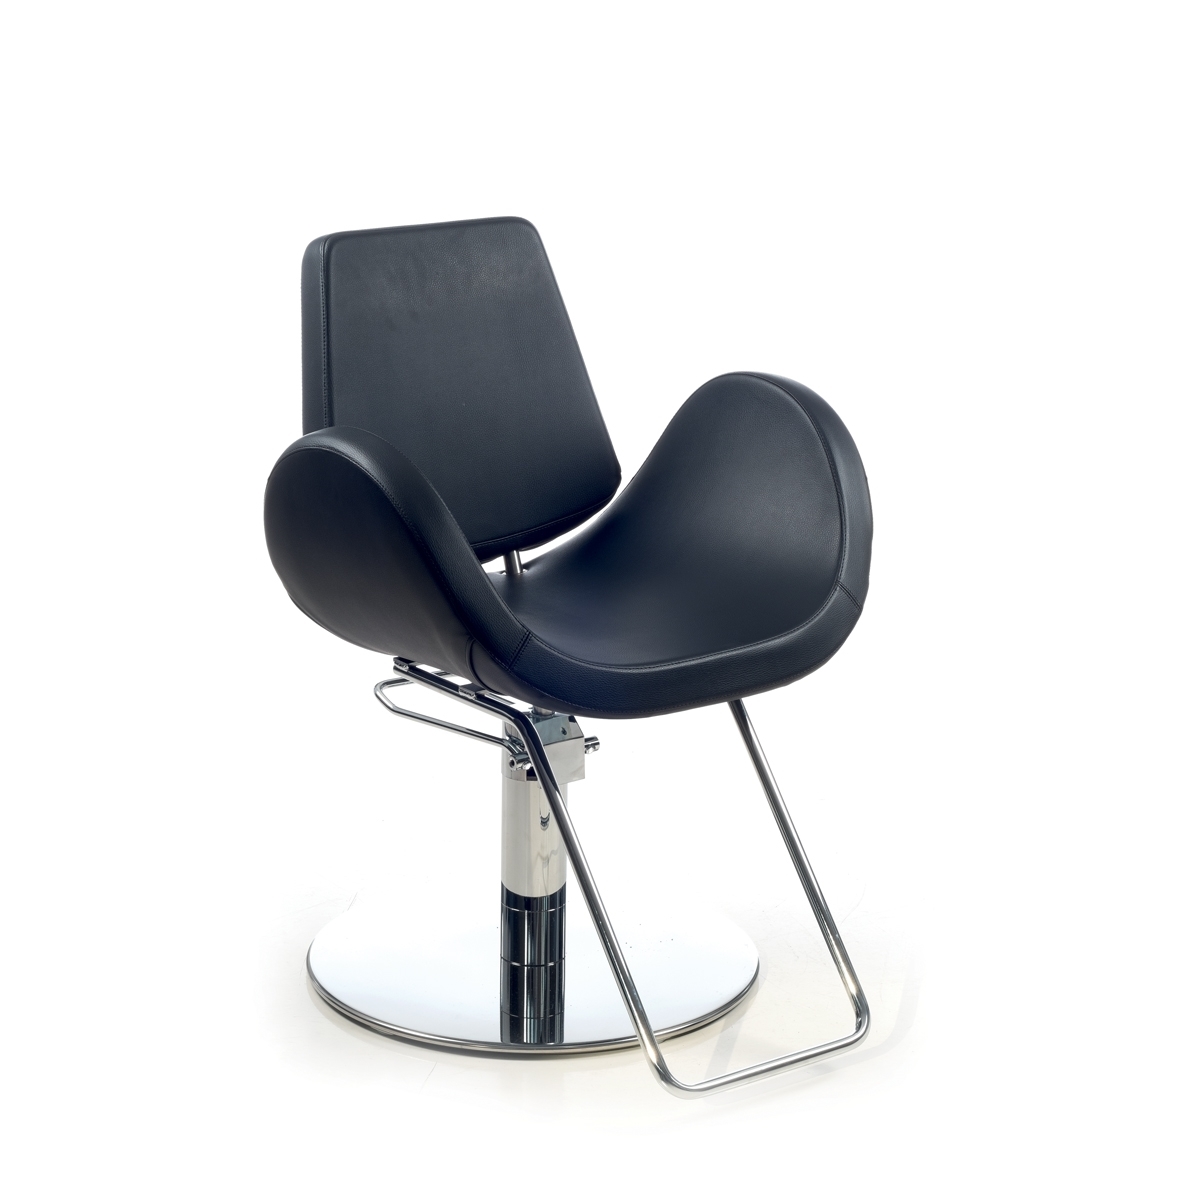 Alipes Black Roto Base Styling Chair by Gamma & Bross Spa